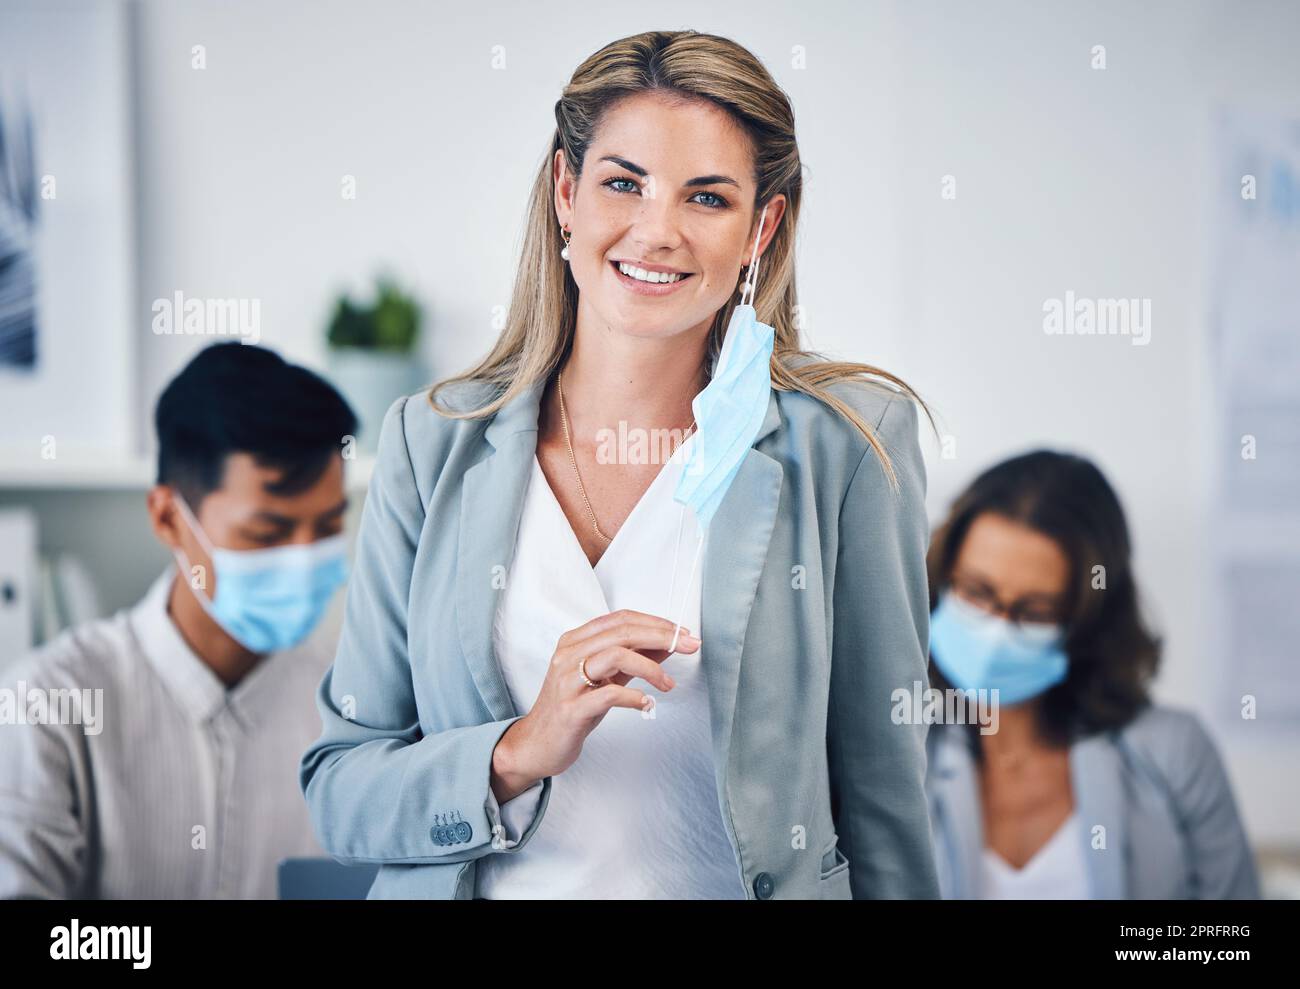 Portrait of a business woman in her office with a face mask and her team during covid pandemic. Corporate, creative and professional manager working on a group project in the company conference room. Stock Photo